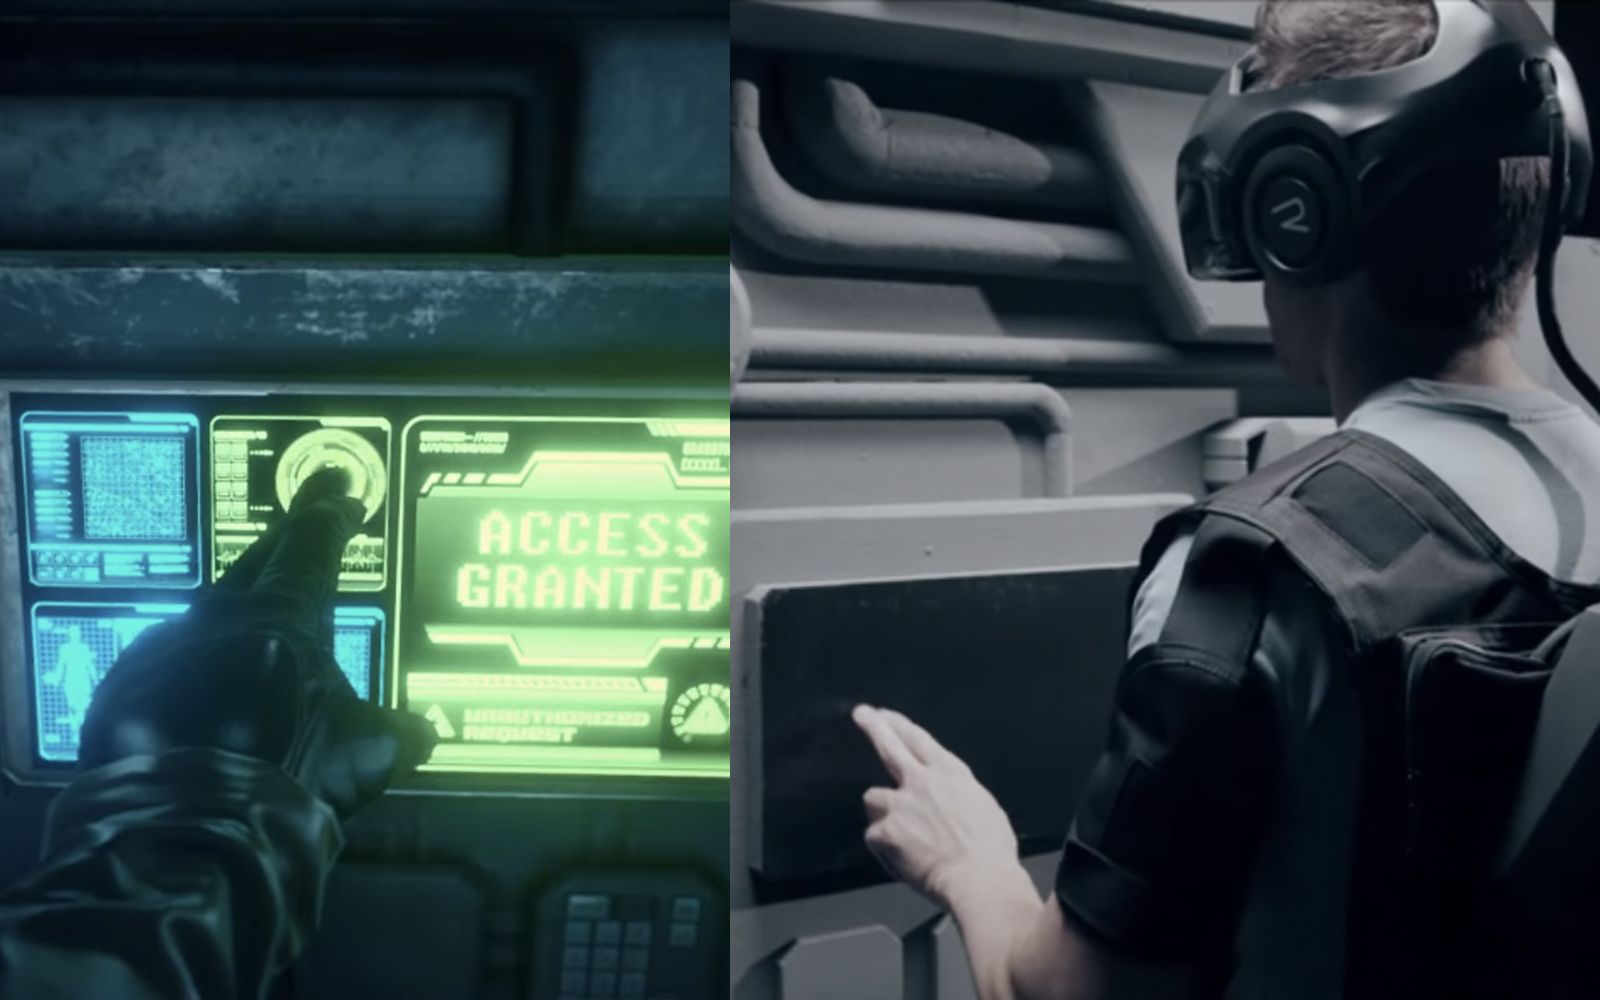 star trek holodeck finally real the void mixes vr with larp for gaming heaven image 1